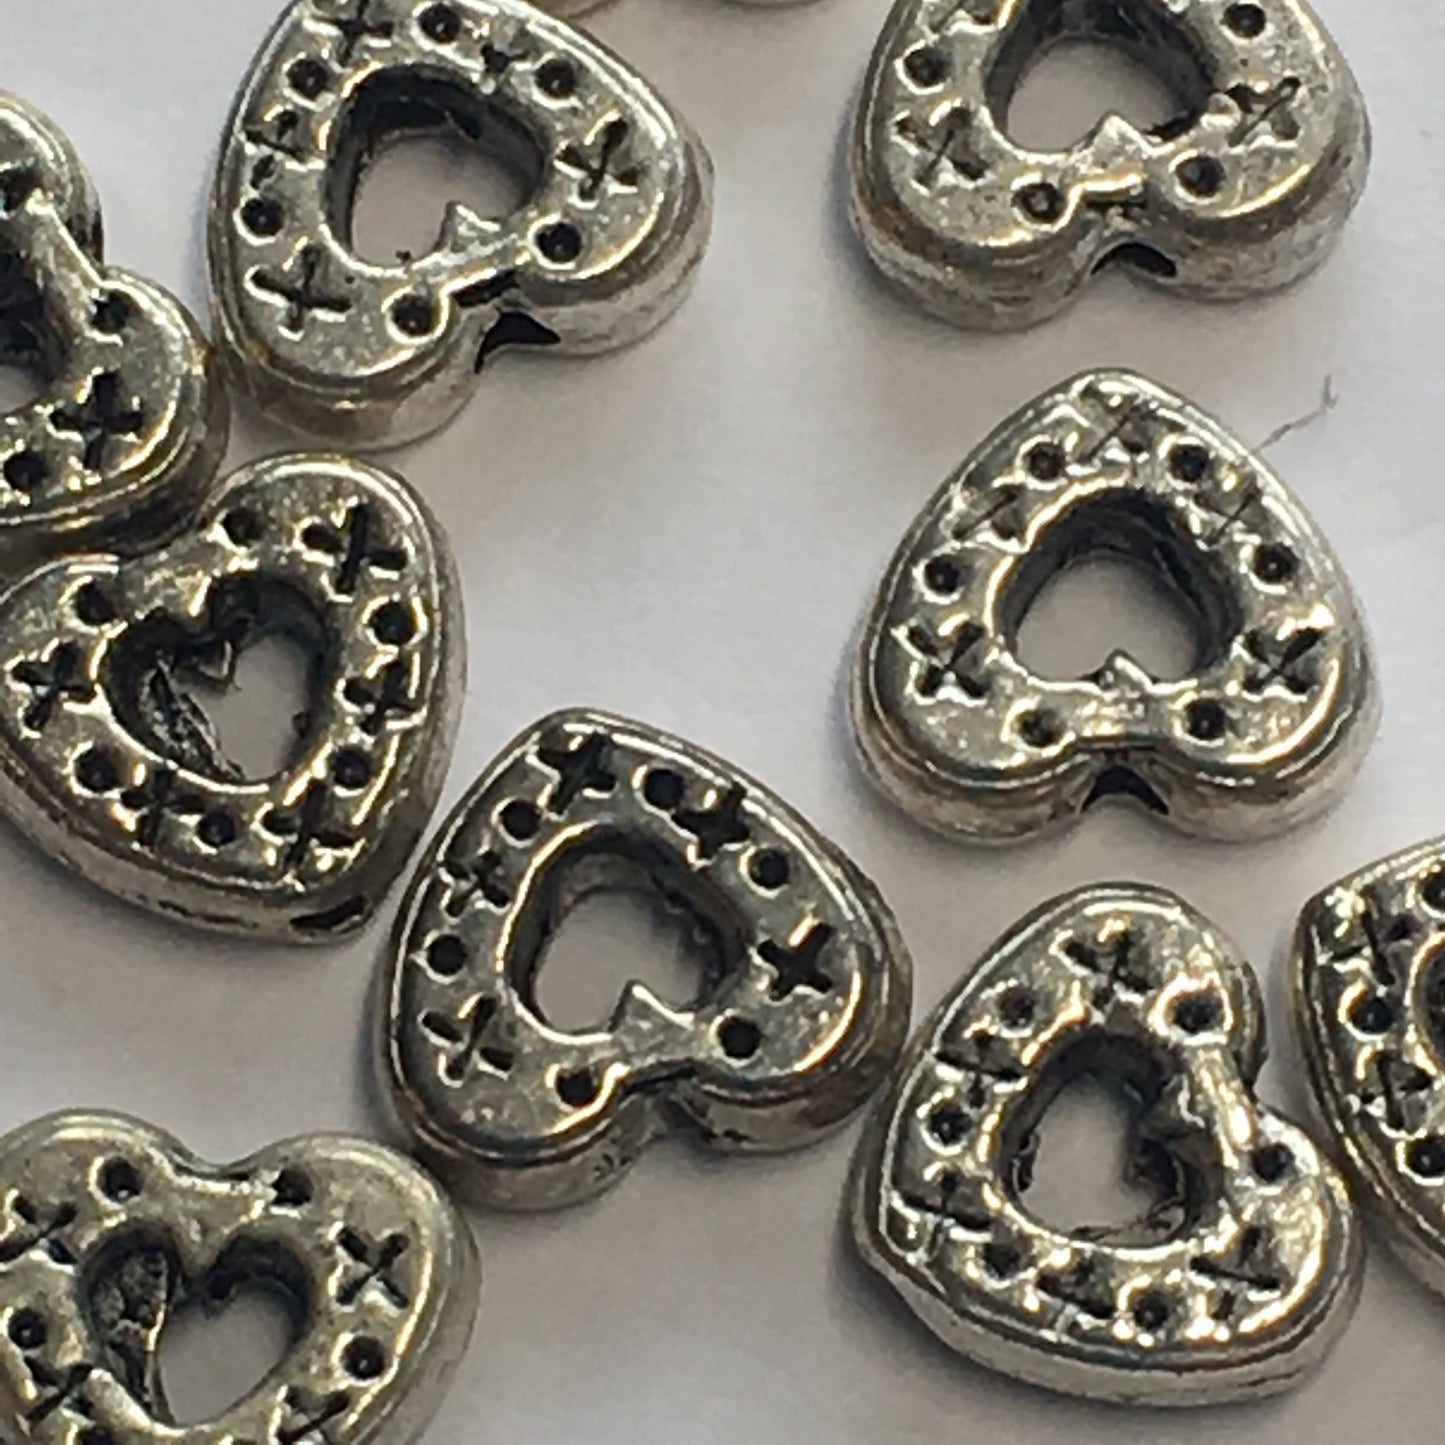 Antique Silver Dotted Heart Frame Beads, 7 x 8 x 3 mm - 6 or 10 Beads